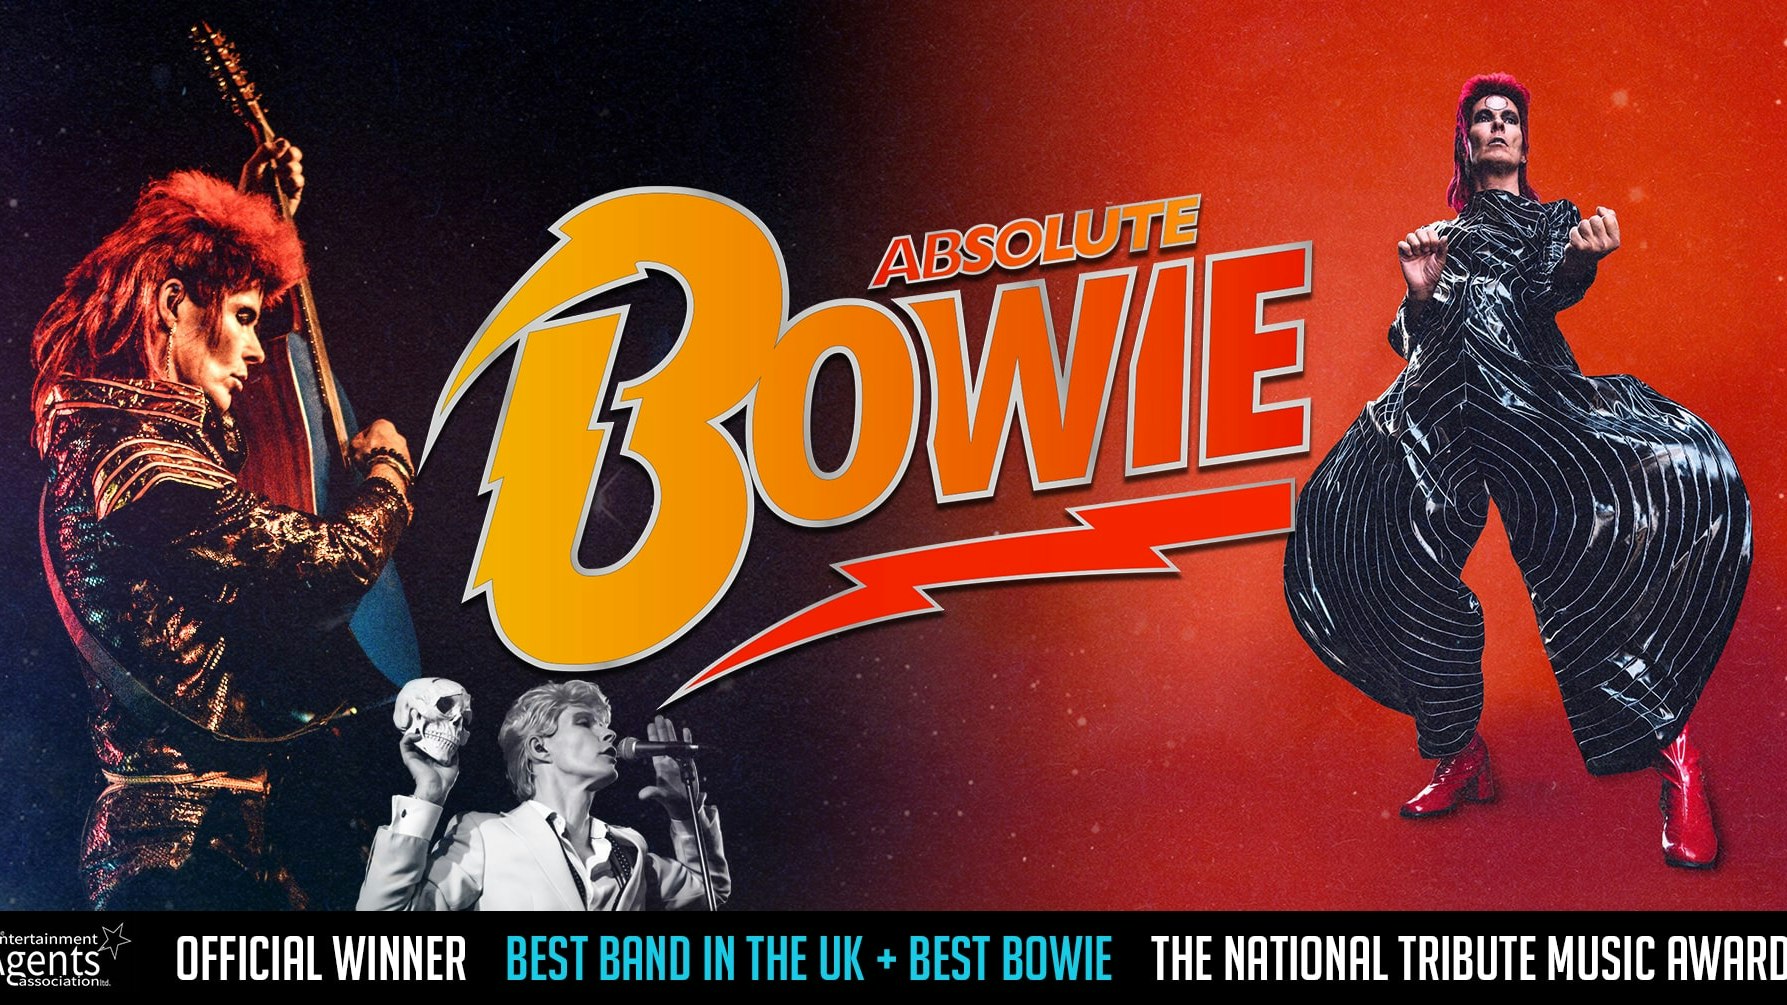 ABSOLUTE BOWIE – ZIGGY STARDUST 50TH ANNIVERSARY TOUR